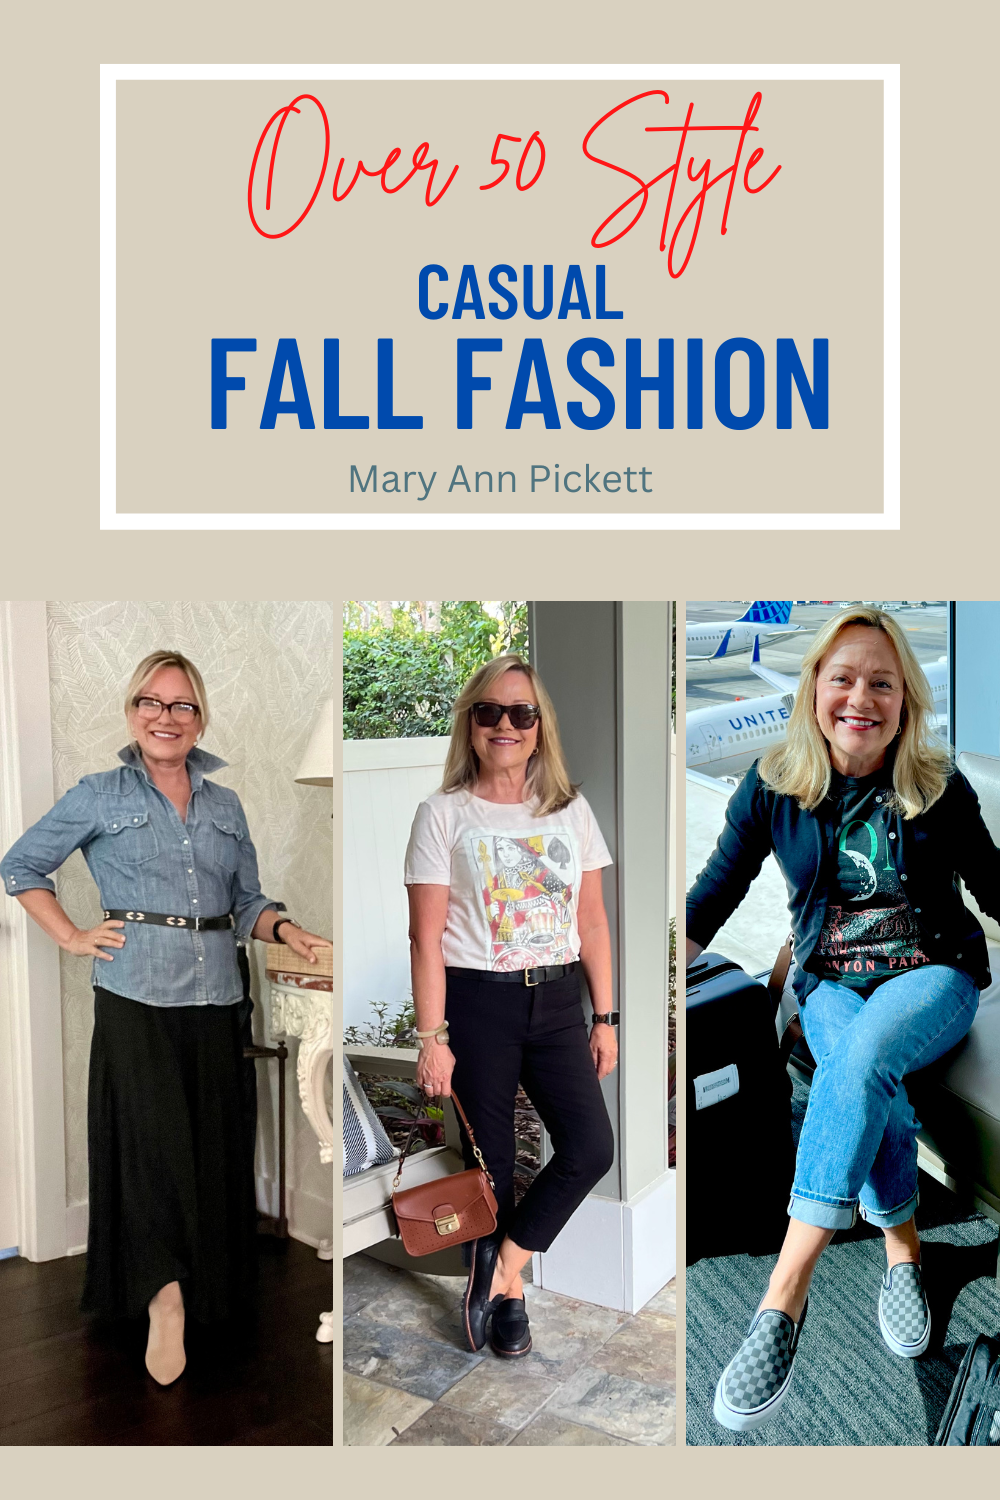 Mary Ann Pickett Fall Fashion collage
Casual Fall Outfits
